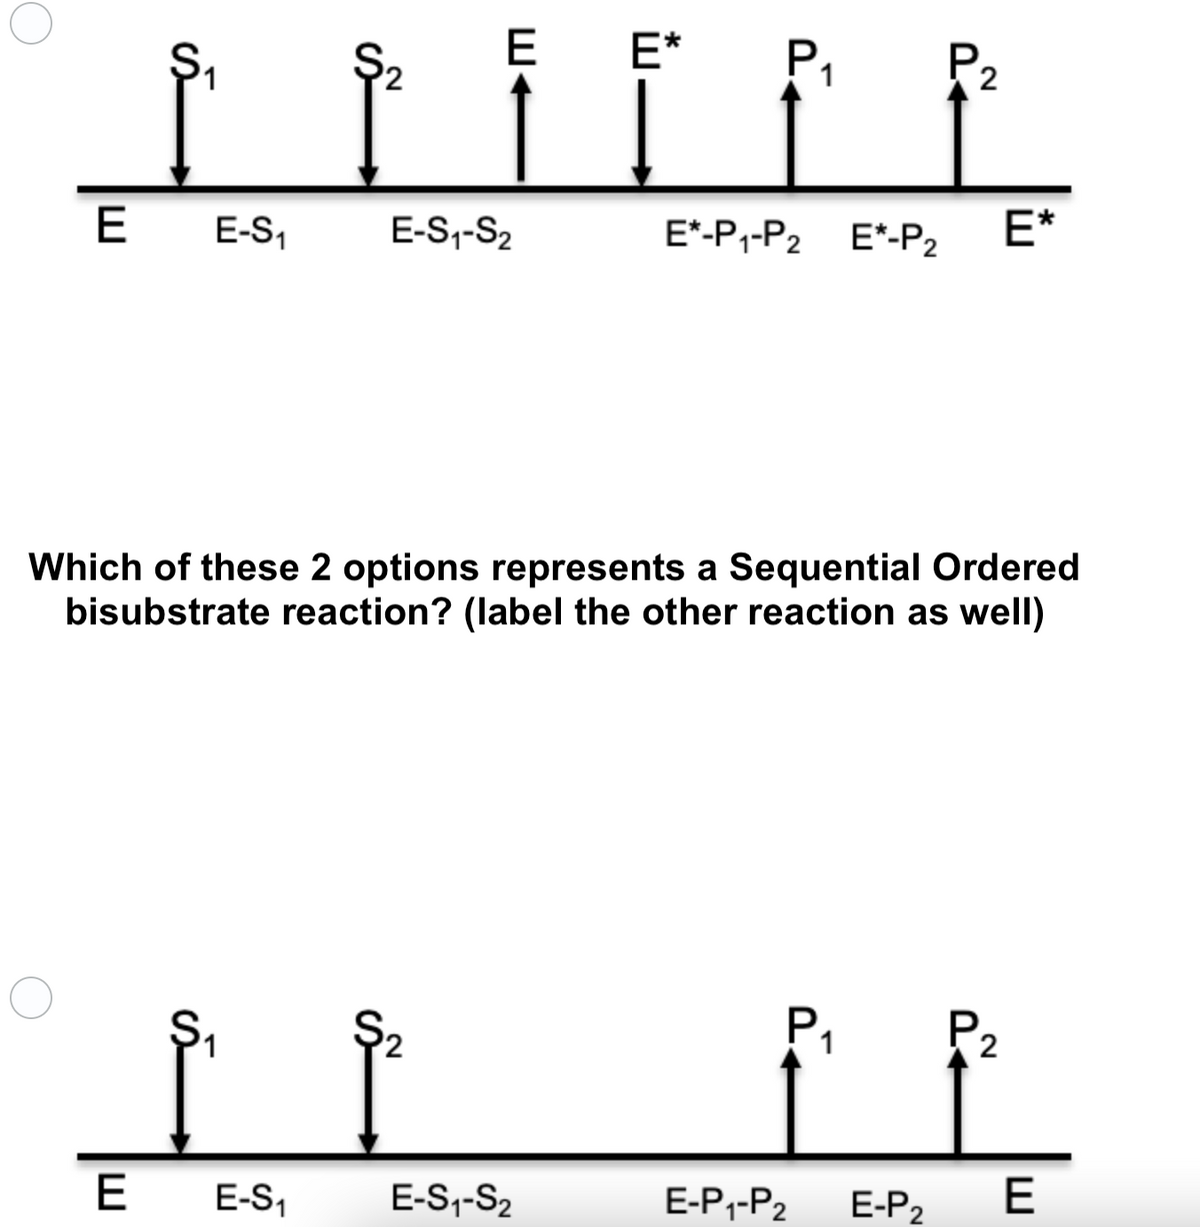 E*
S
P₁₁ P₂
E E-S₁
E-S₁-S₂
E-P₁-P₂ E*-P₂ E*
Which of these 2 options represents a Sequential Ordered
bisubstrate reaction? (label the other reaction as well)
P₁
P₂
E-S₁-S₂
E-P₁-P₂ E-P₂ E
is
E E-S₁
S
E◄